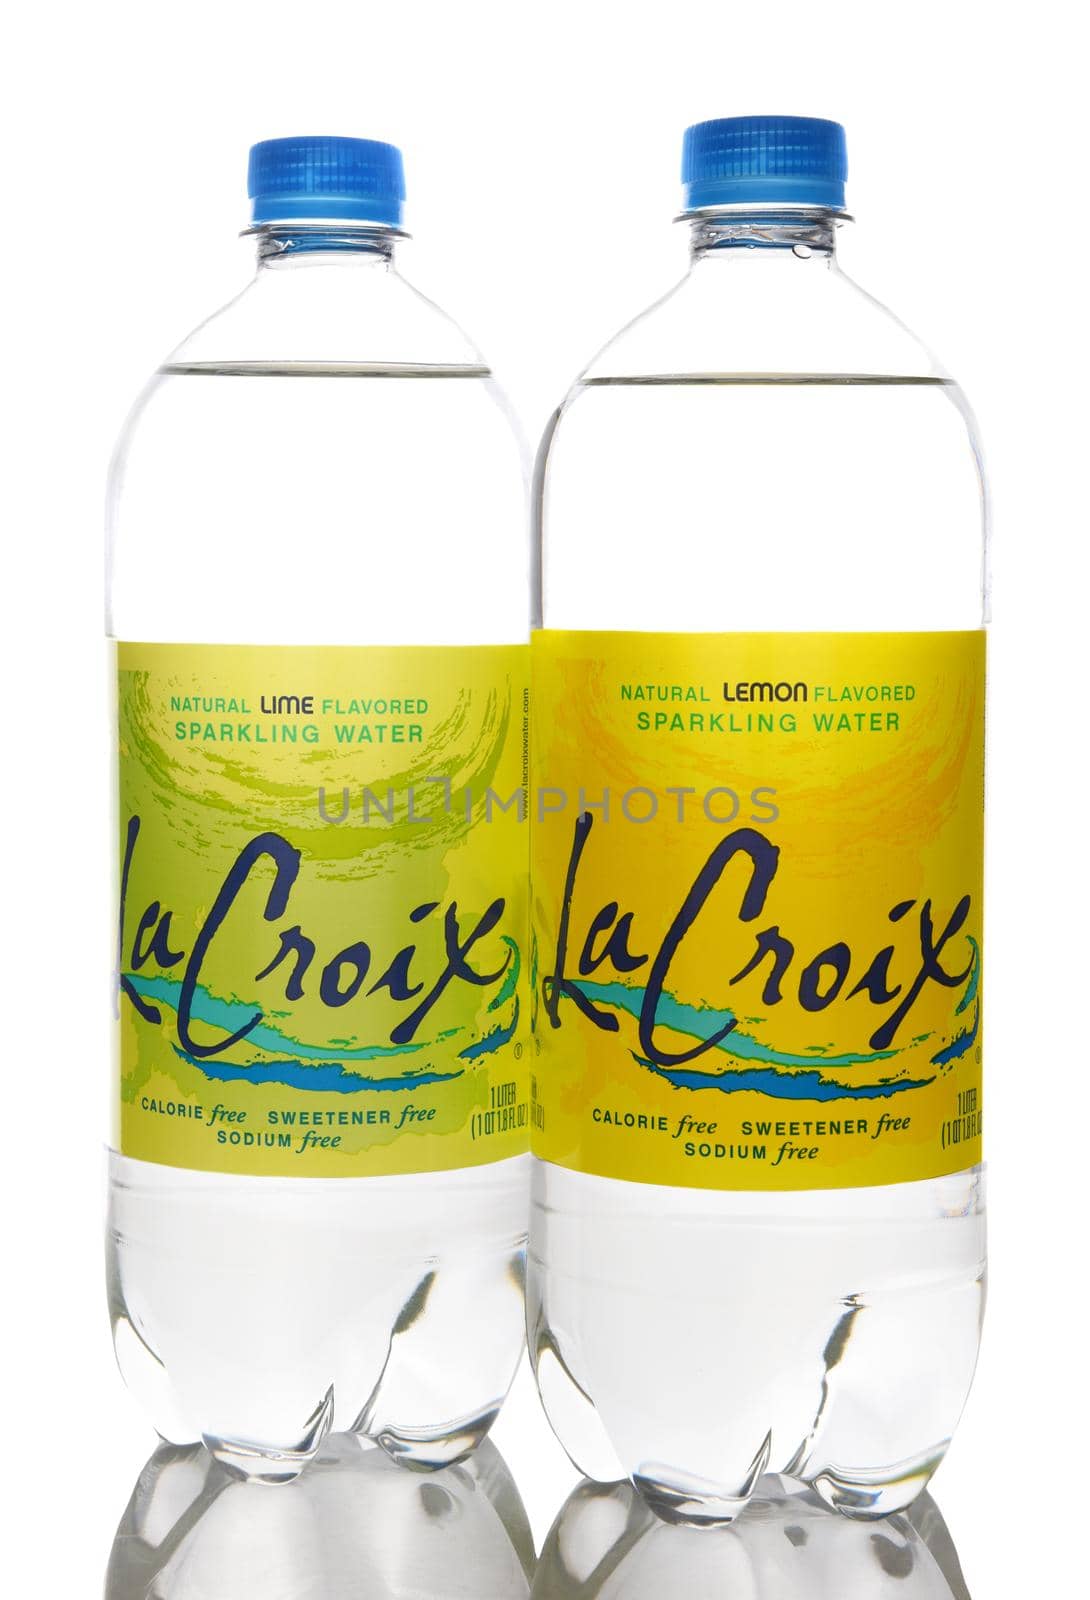 IRVINE, CALIFORNIA - 9 OCT 2019: Two bottles of La Croix Flavored Sparkling Water